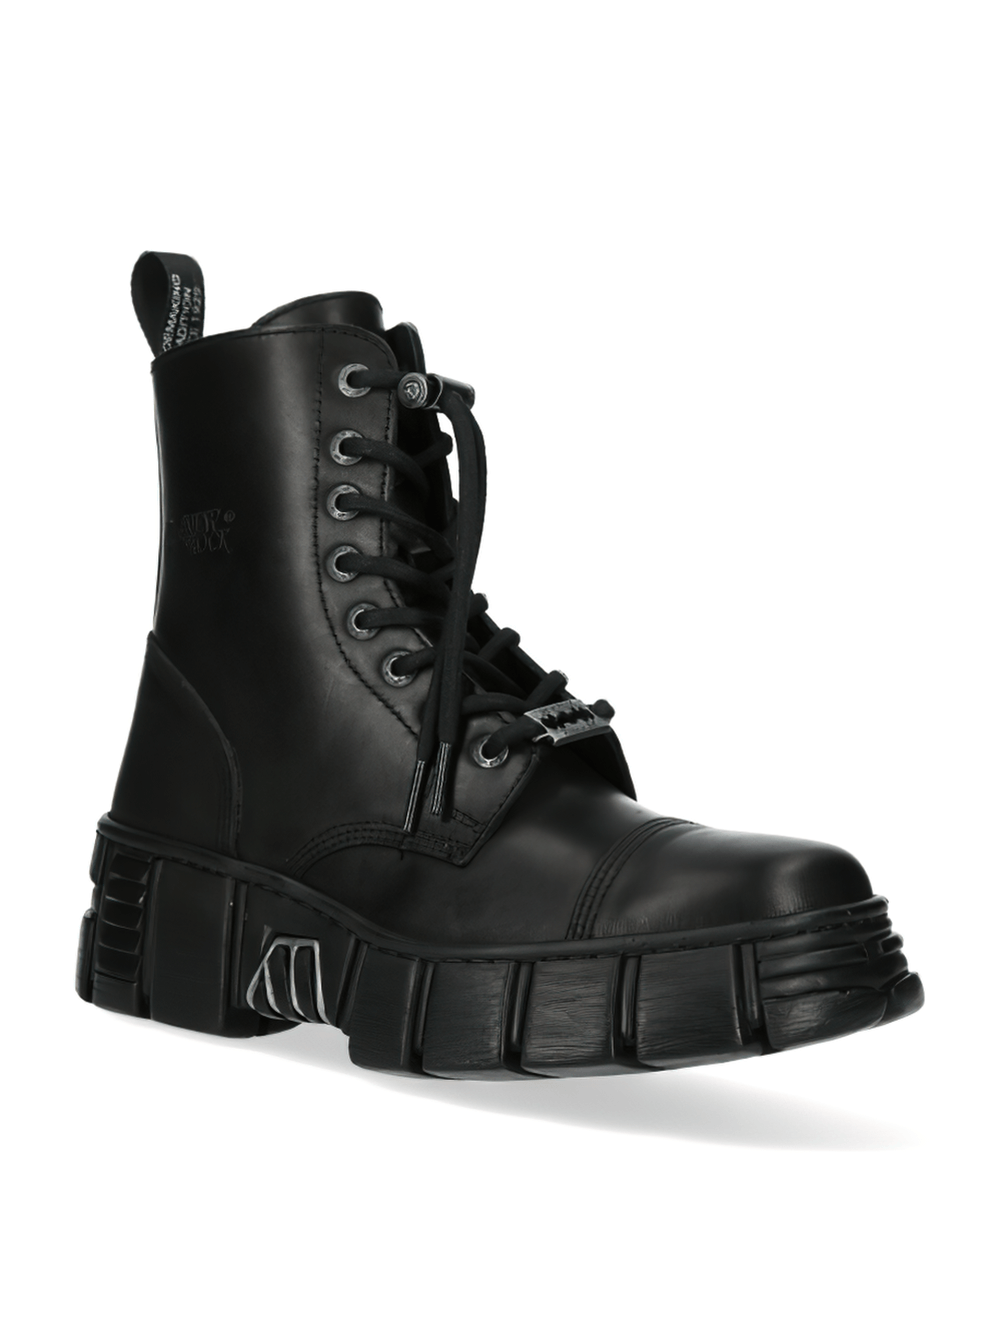 NEW ROCK Military Gothic Ankle Boots in Black Leather